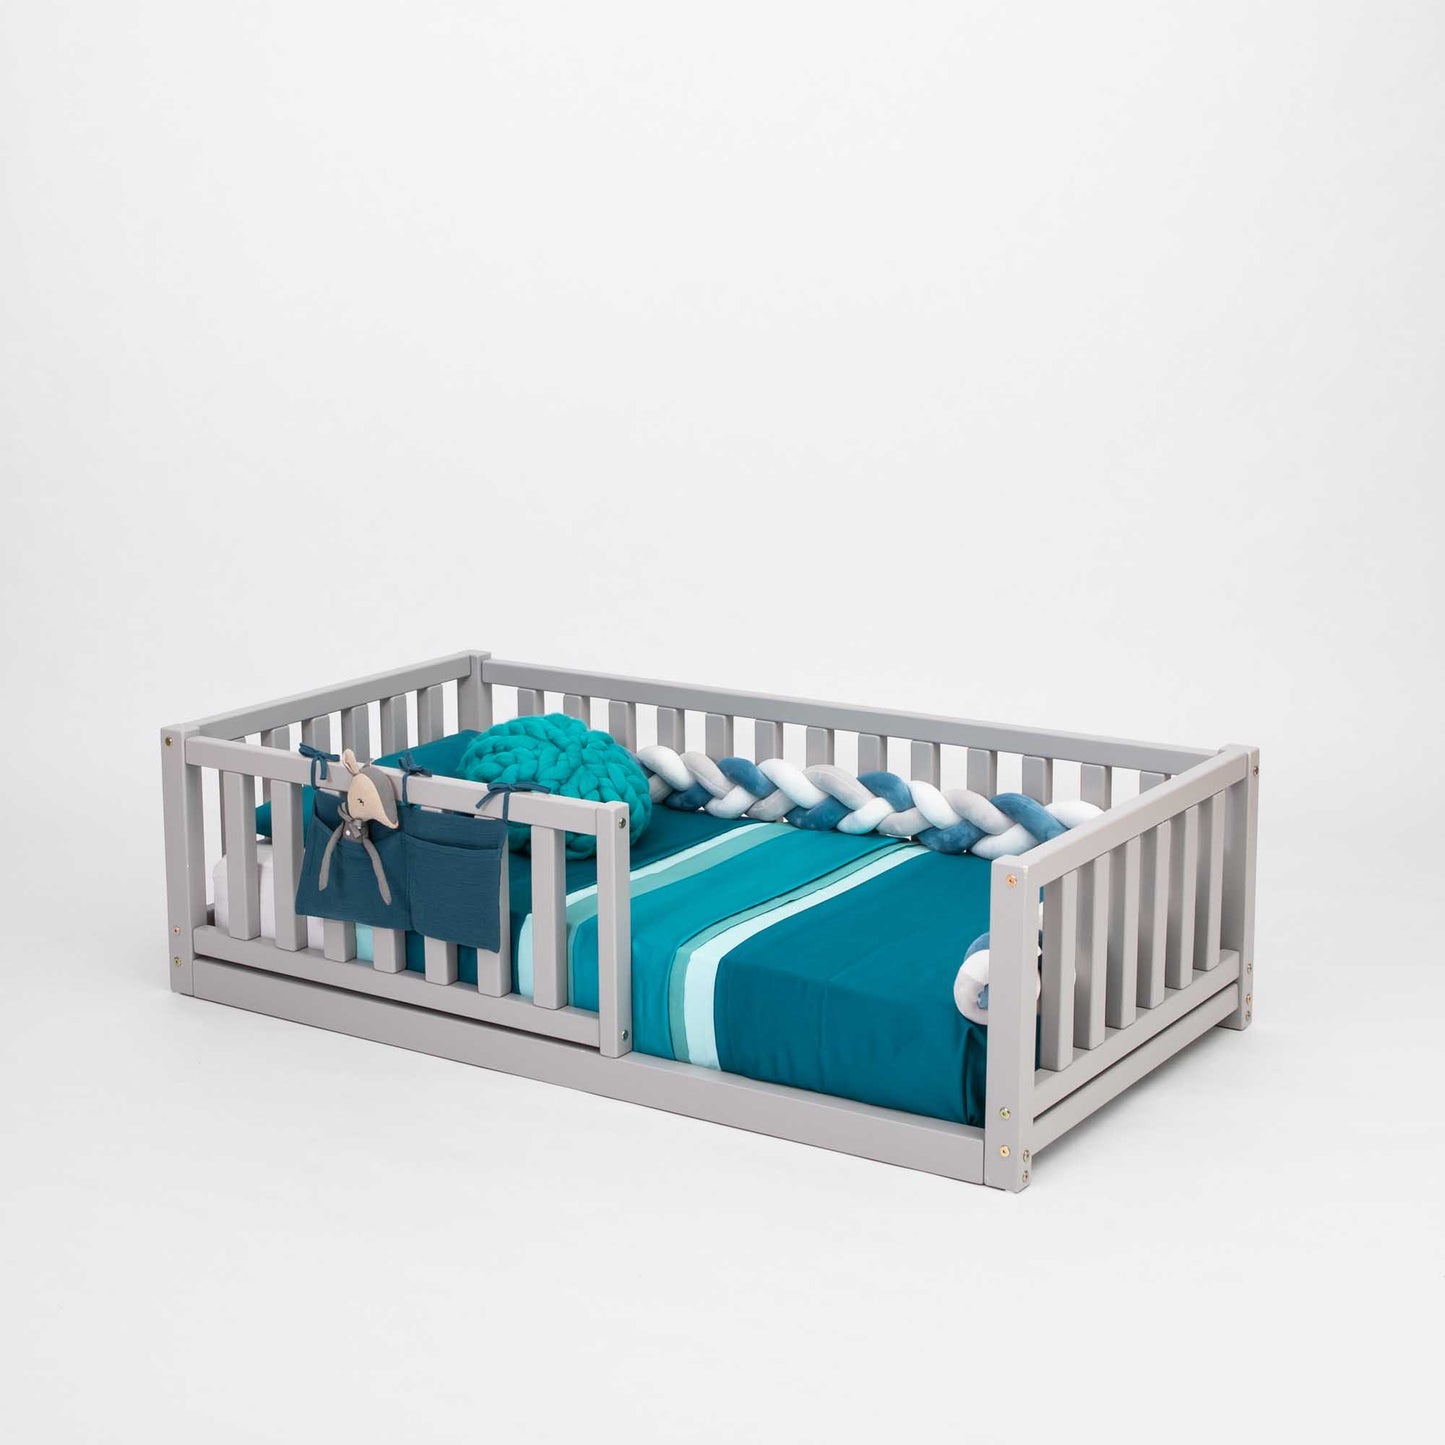 A Montessori kids' bed with a fence and blue and white bedding designed for independent sleeping by Sweet Home From Wood.